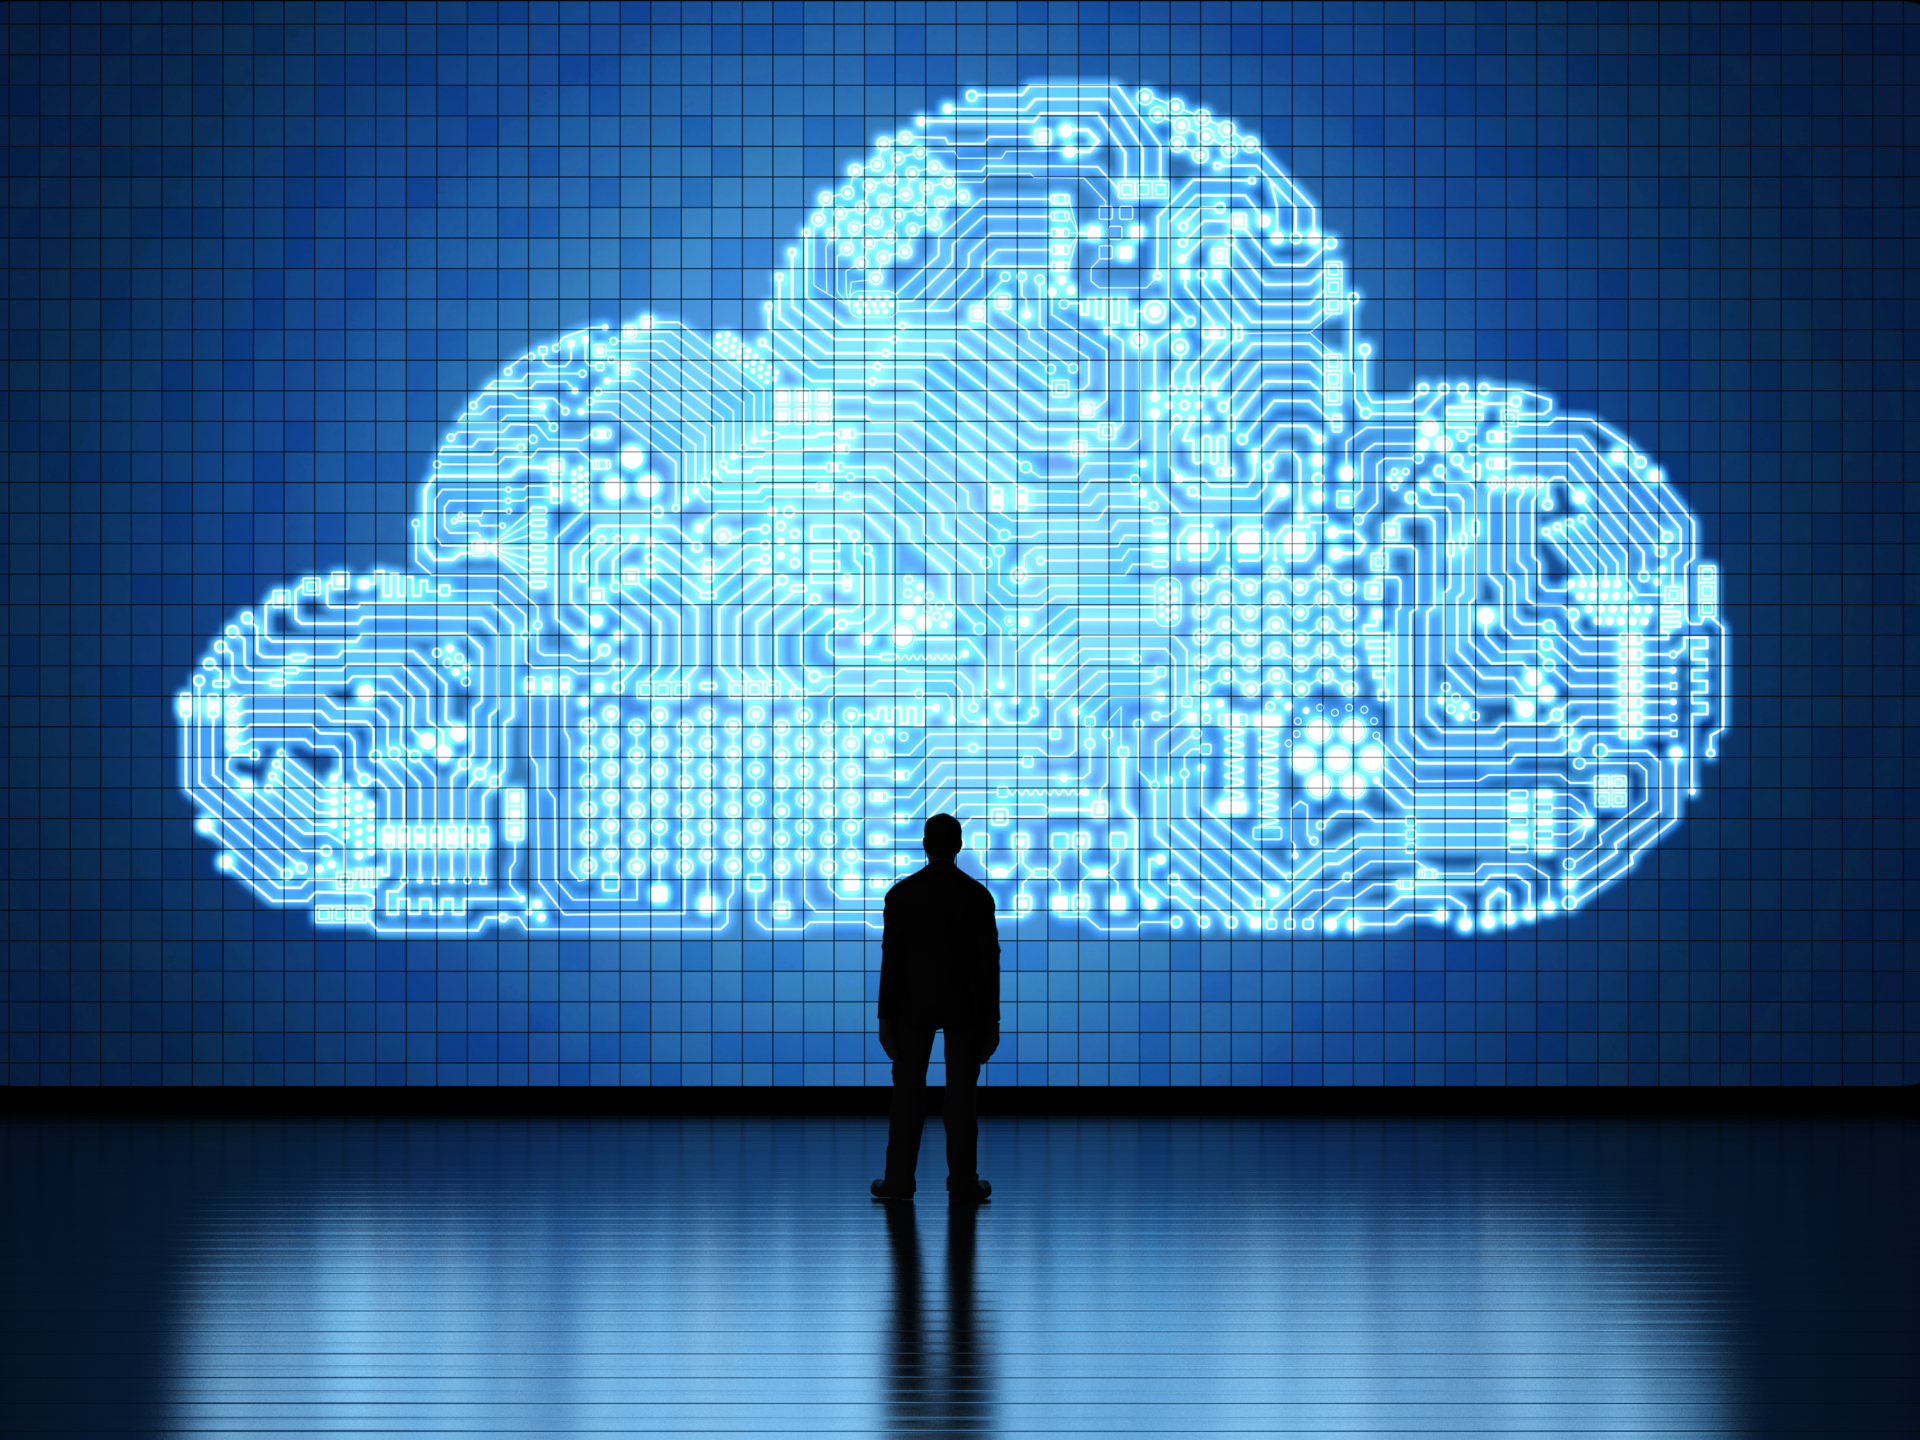 Part II – The Advantages and Disadvantages of Cloud Computing